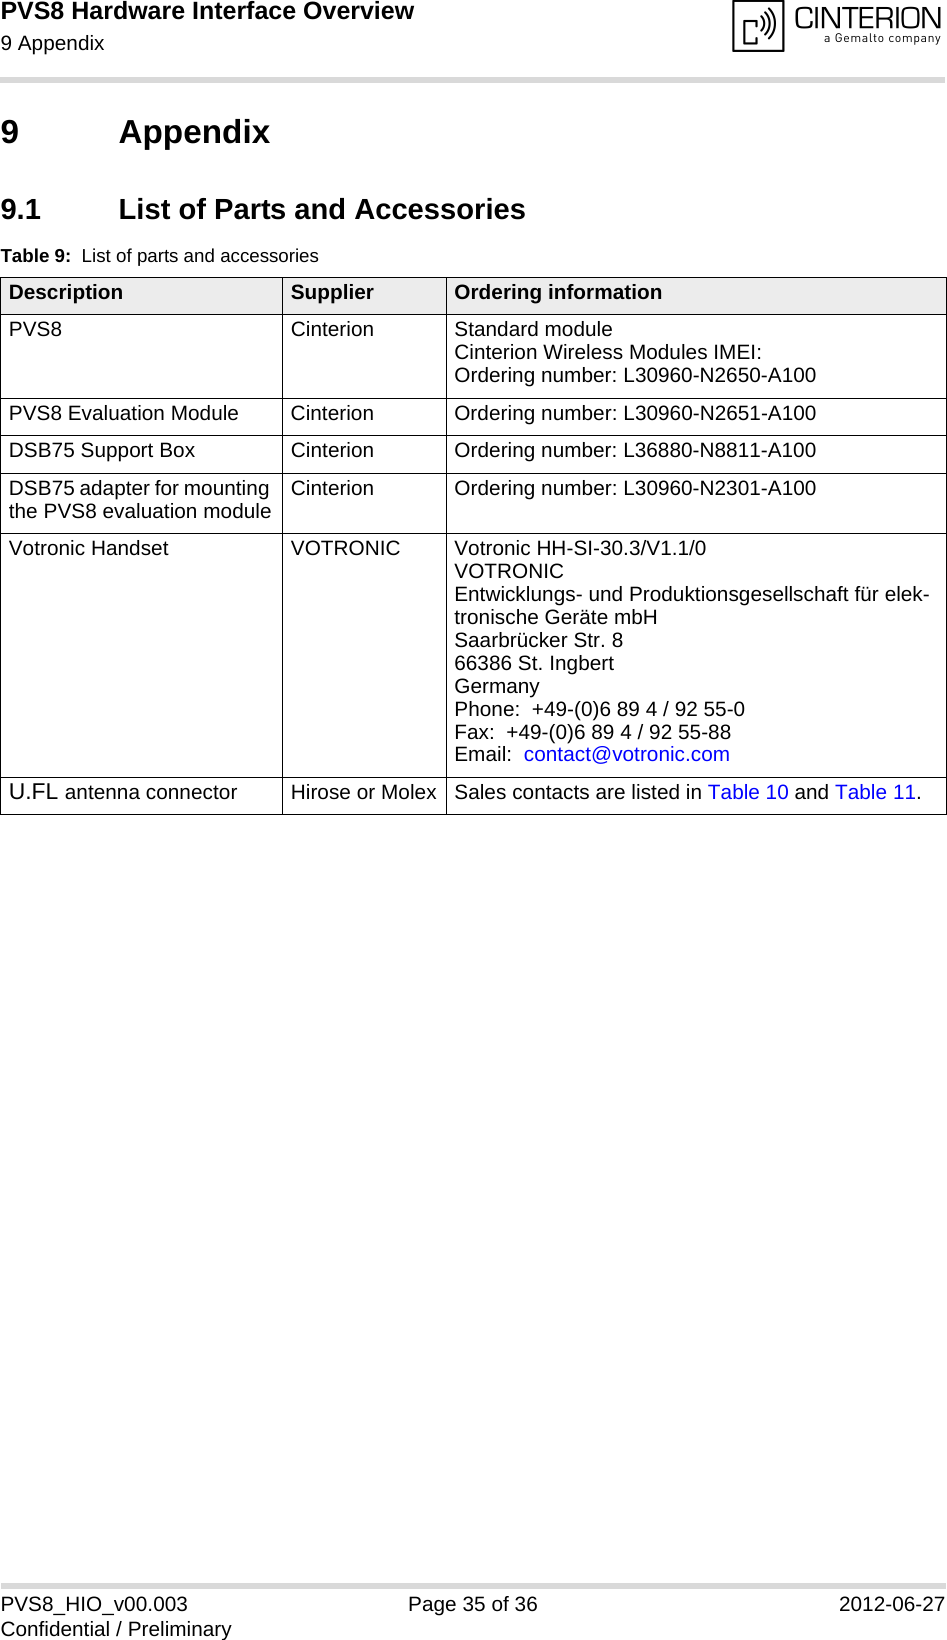 PVS8 Hardware Interface Overview9 Appendix36PVS8_HIO_v00.003 Page 35 of 36 2012-06-27Confidential / Preliminary9 Appendix9.1 List of Parts and AccessoriesTable 9:  List of parts and accessoriesDescription Supplier Ordering informationPVS8 Cinterion Standard module Cinterion Wireless Modules IMEI:Ordering number: L30960-N2650-A100PVS8 Evaluation Module Cinterion Ordering number: L30960-N2651-A100DSB75 Support Box Cinterion Ordering number: L36880-N8811-A100DSB75 adapter for mounting the PVS8 evaluation module Cinterion Ordering number: L30960-N2301-A100Votronic Handset VOTRONIC Votronic HH-SI-30.3/V1.1/0VOTRONIC Entwicklungs- und Produktionsgesellschaft für elek-tronische Geräte mbHSaarbrücker Str. 866386 St. IngbertGermanyPhone:  +49-(0)6 89 4 / 92 55-0Fax:  +49-(0)6 89 4 / 92 55-88Email:  contact@votronic.comU.FL antenna connector Hirose or Molex Sales contacts are listed in Table 10 and Table 11.